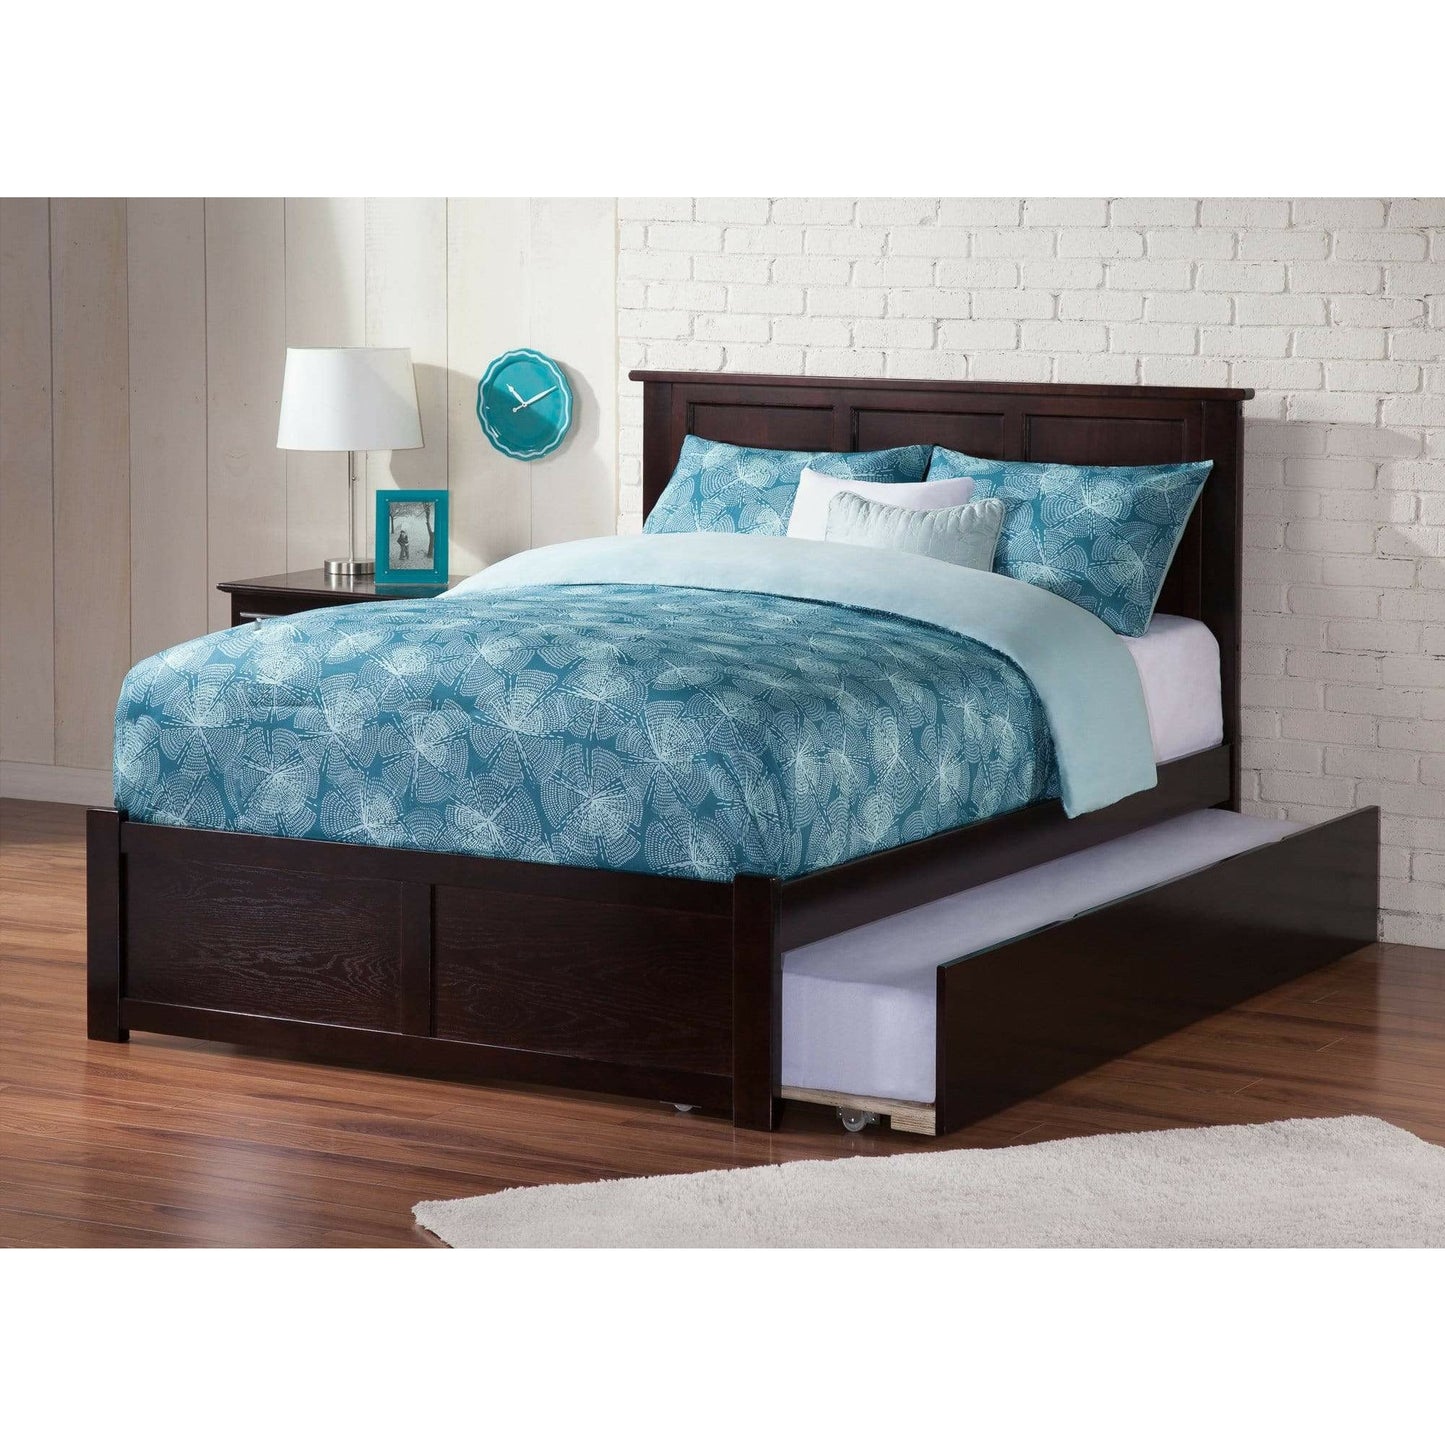 Atlantic Furniture Bed Espresso Madison Full Platform Bed with Matching Foot Board with Full Size Urban Trundle Bed in Espresso